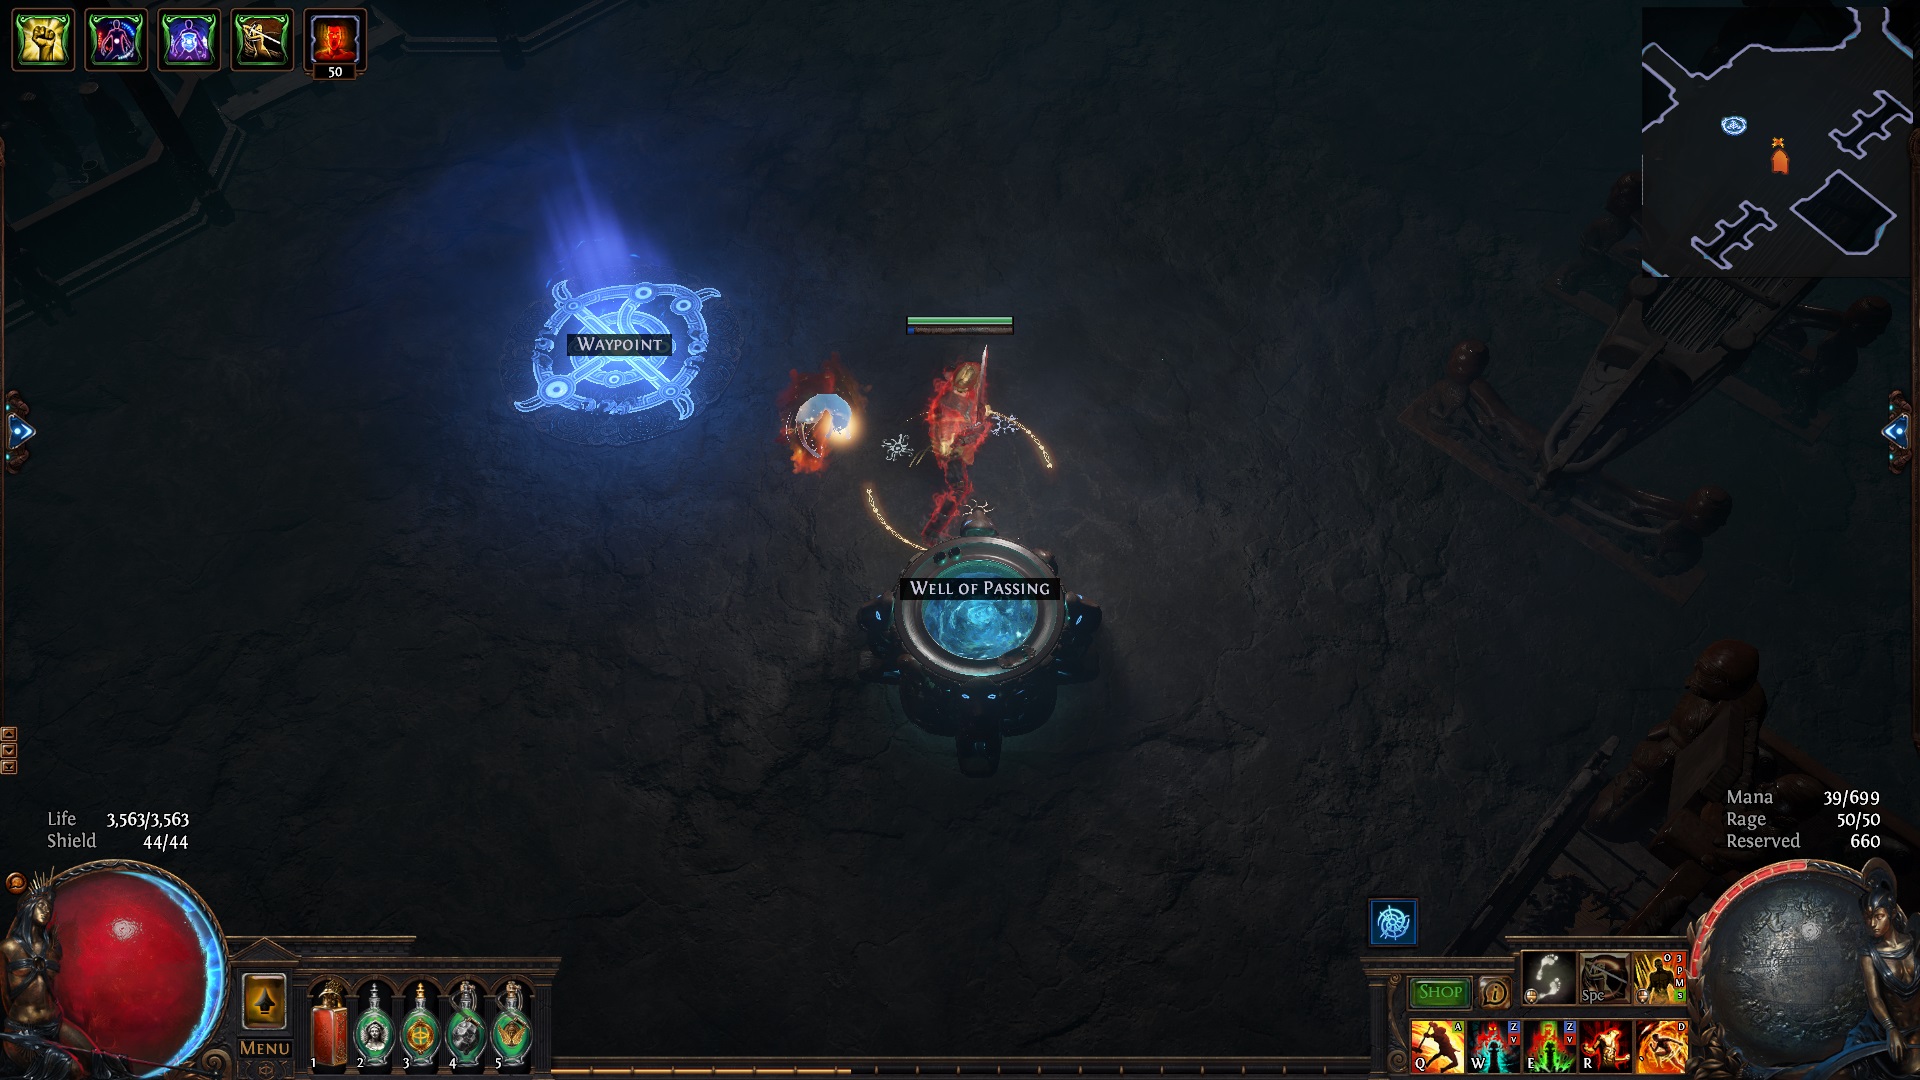 The new Well of Passing in PoE